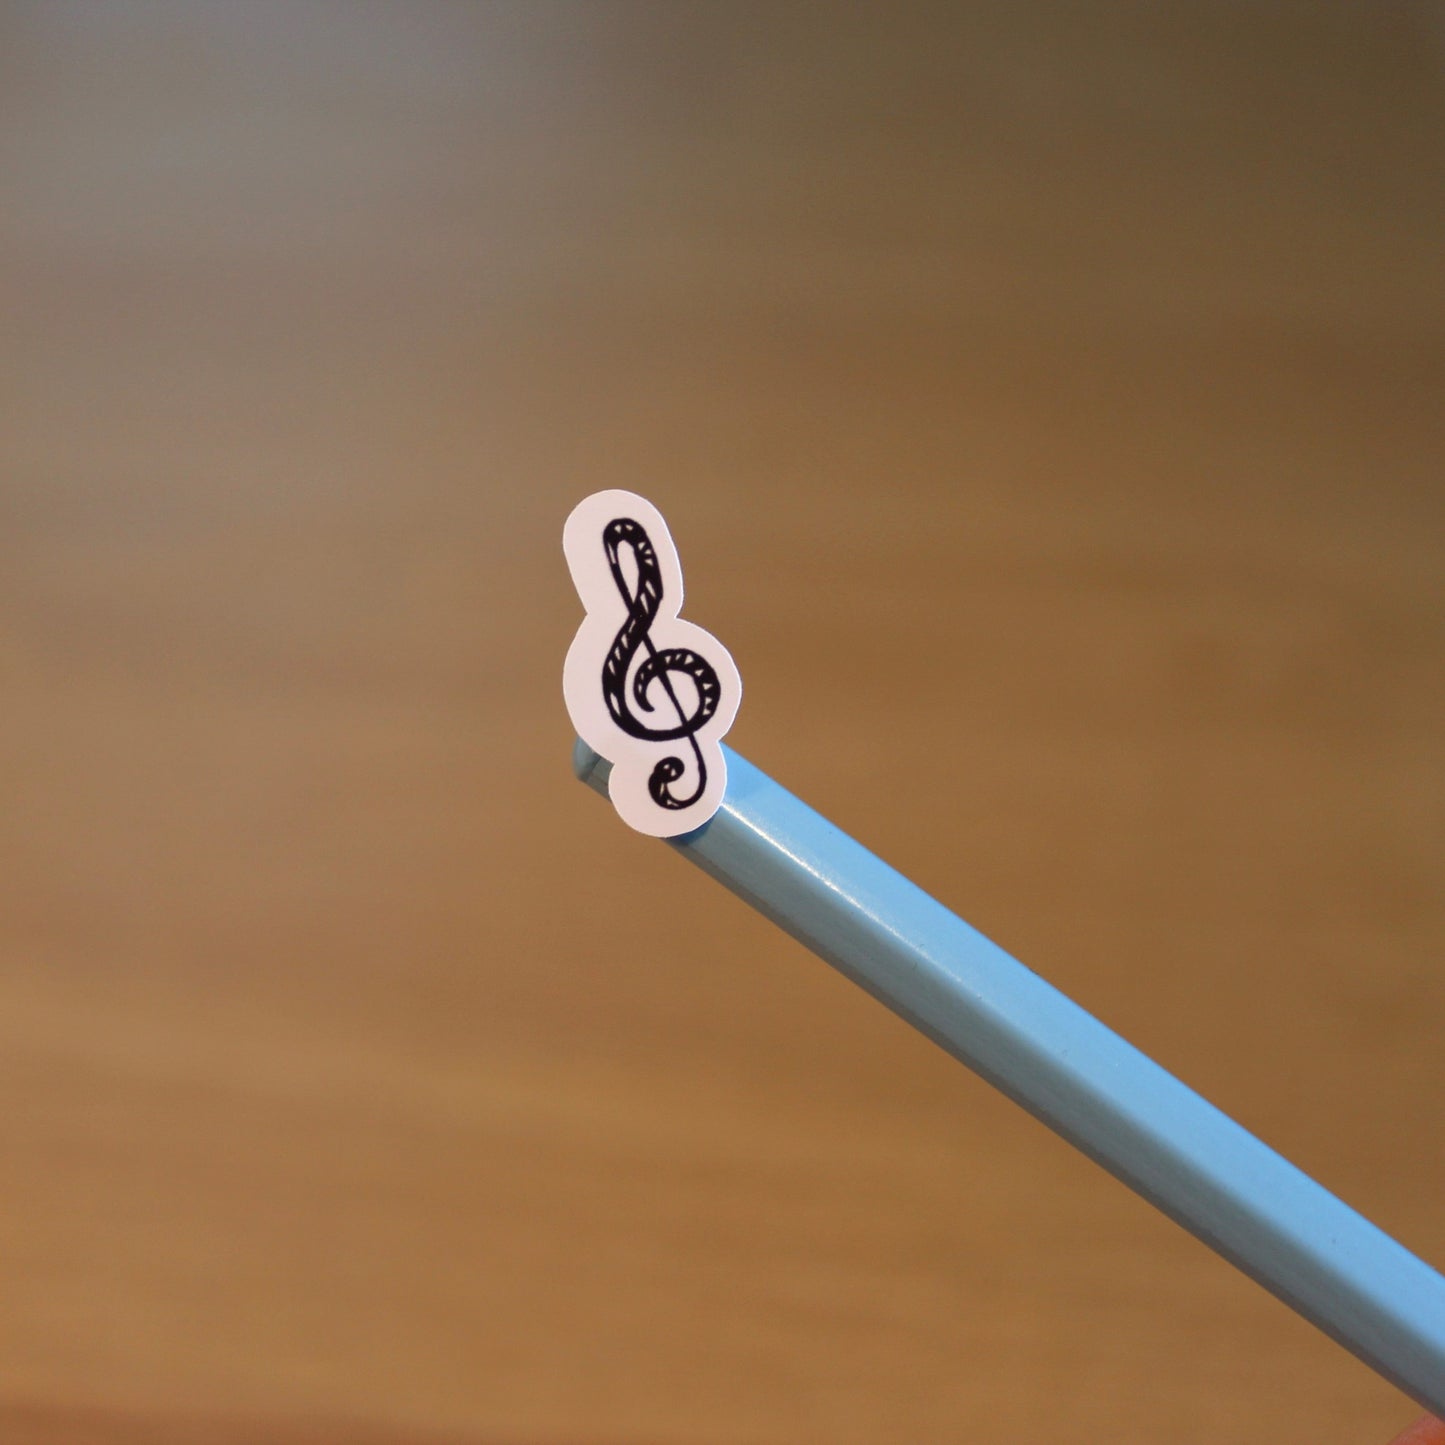 Treble clef symbol sticker displayed on the end of a pencil